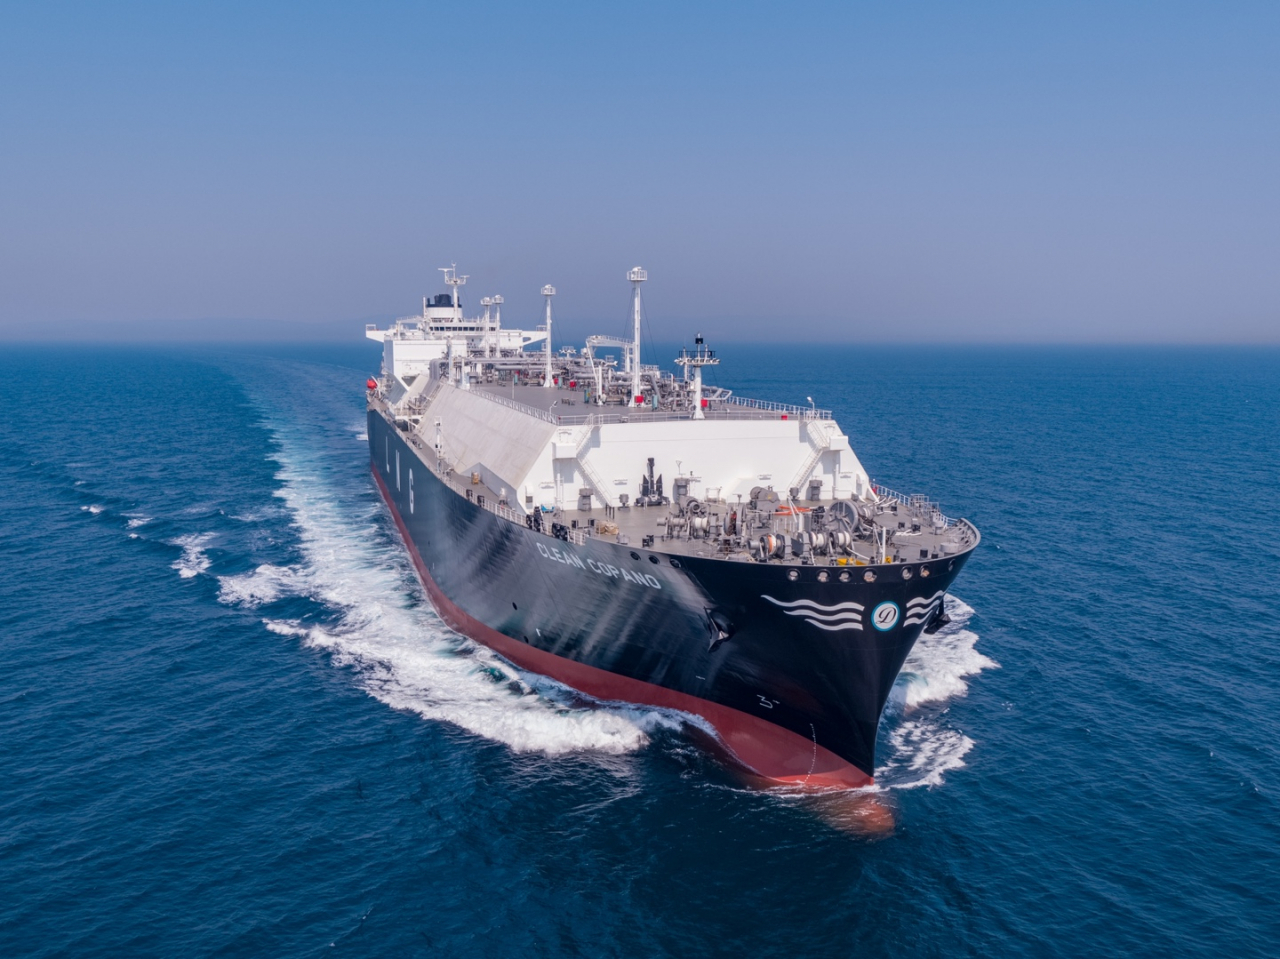 A 200,000 cubic meter-sized liquefied natural gas carrier built by Hyundai Heavy Industries goes for a test drive. (KSOE)